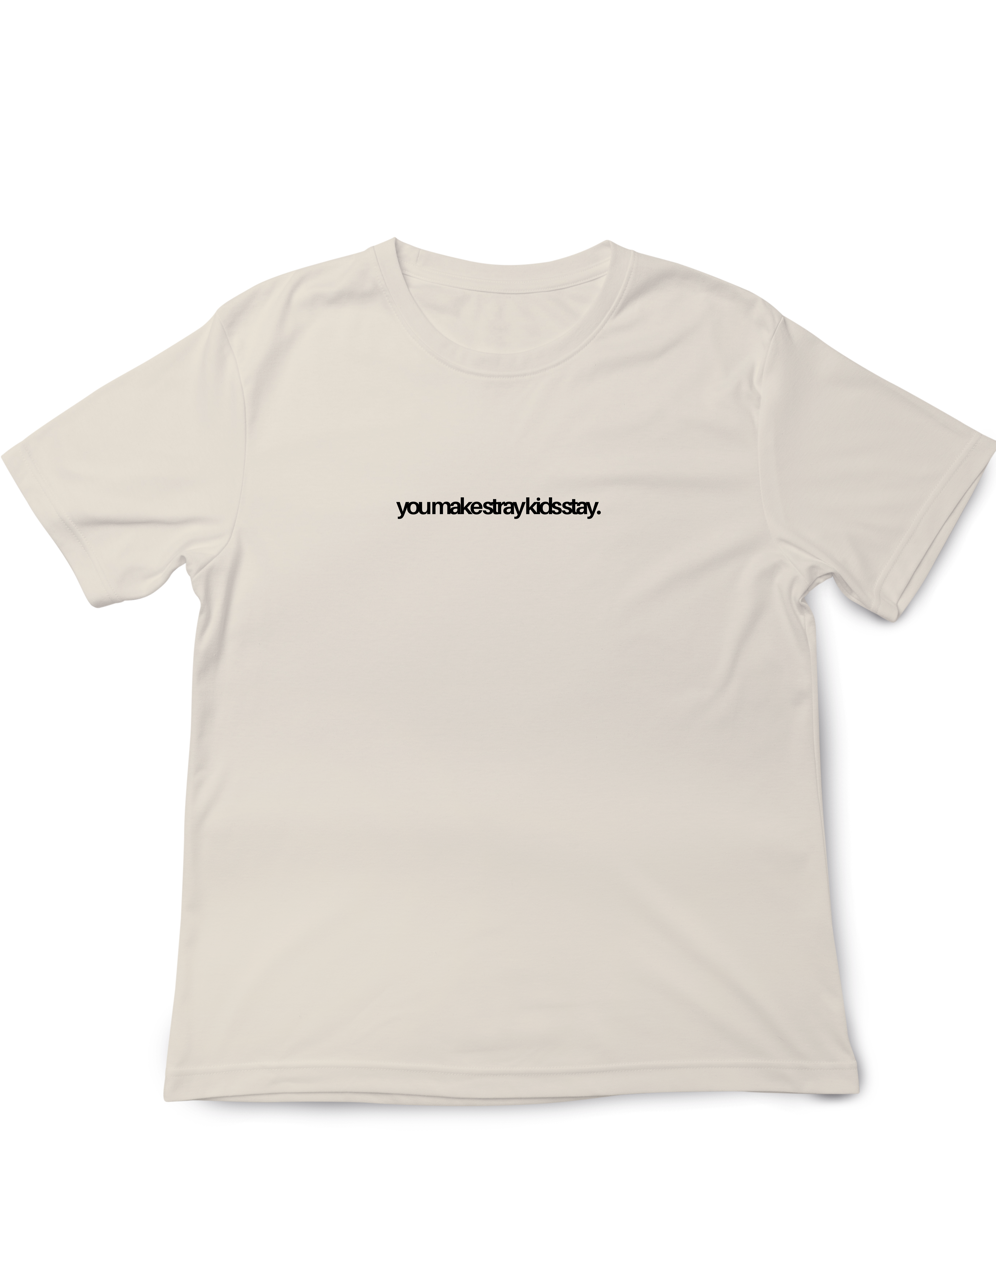 Stray Kids Discography T-Shirt